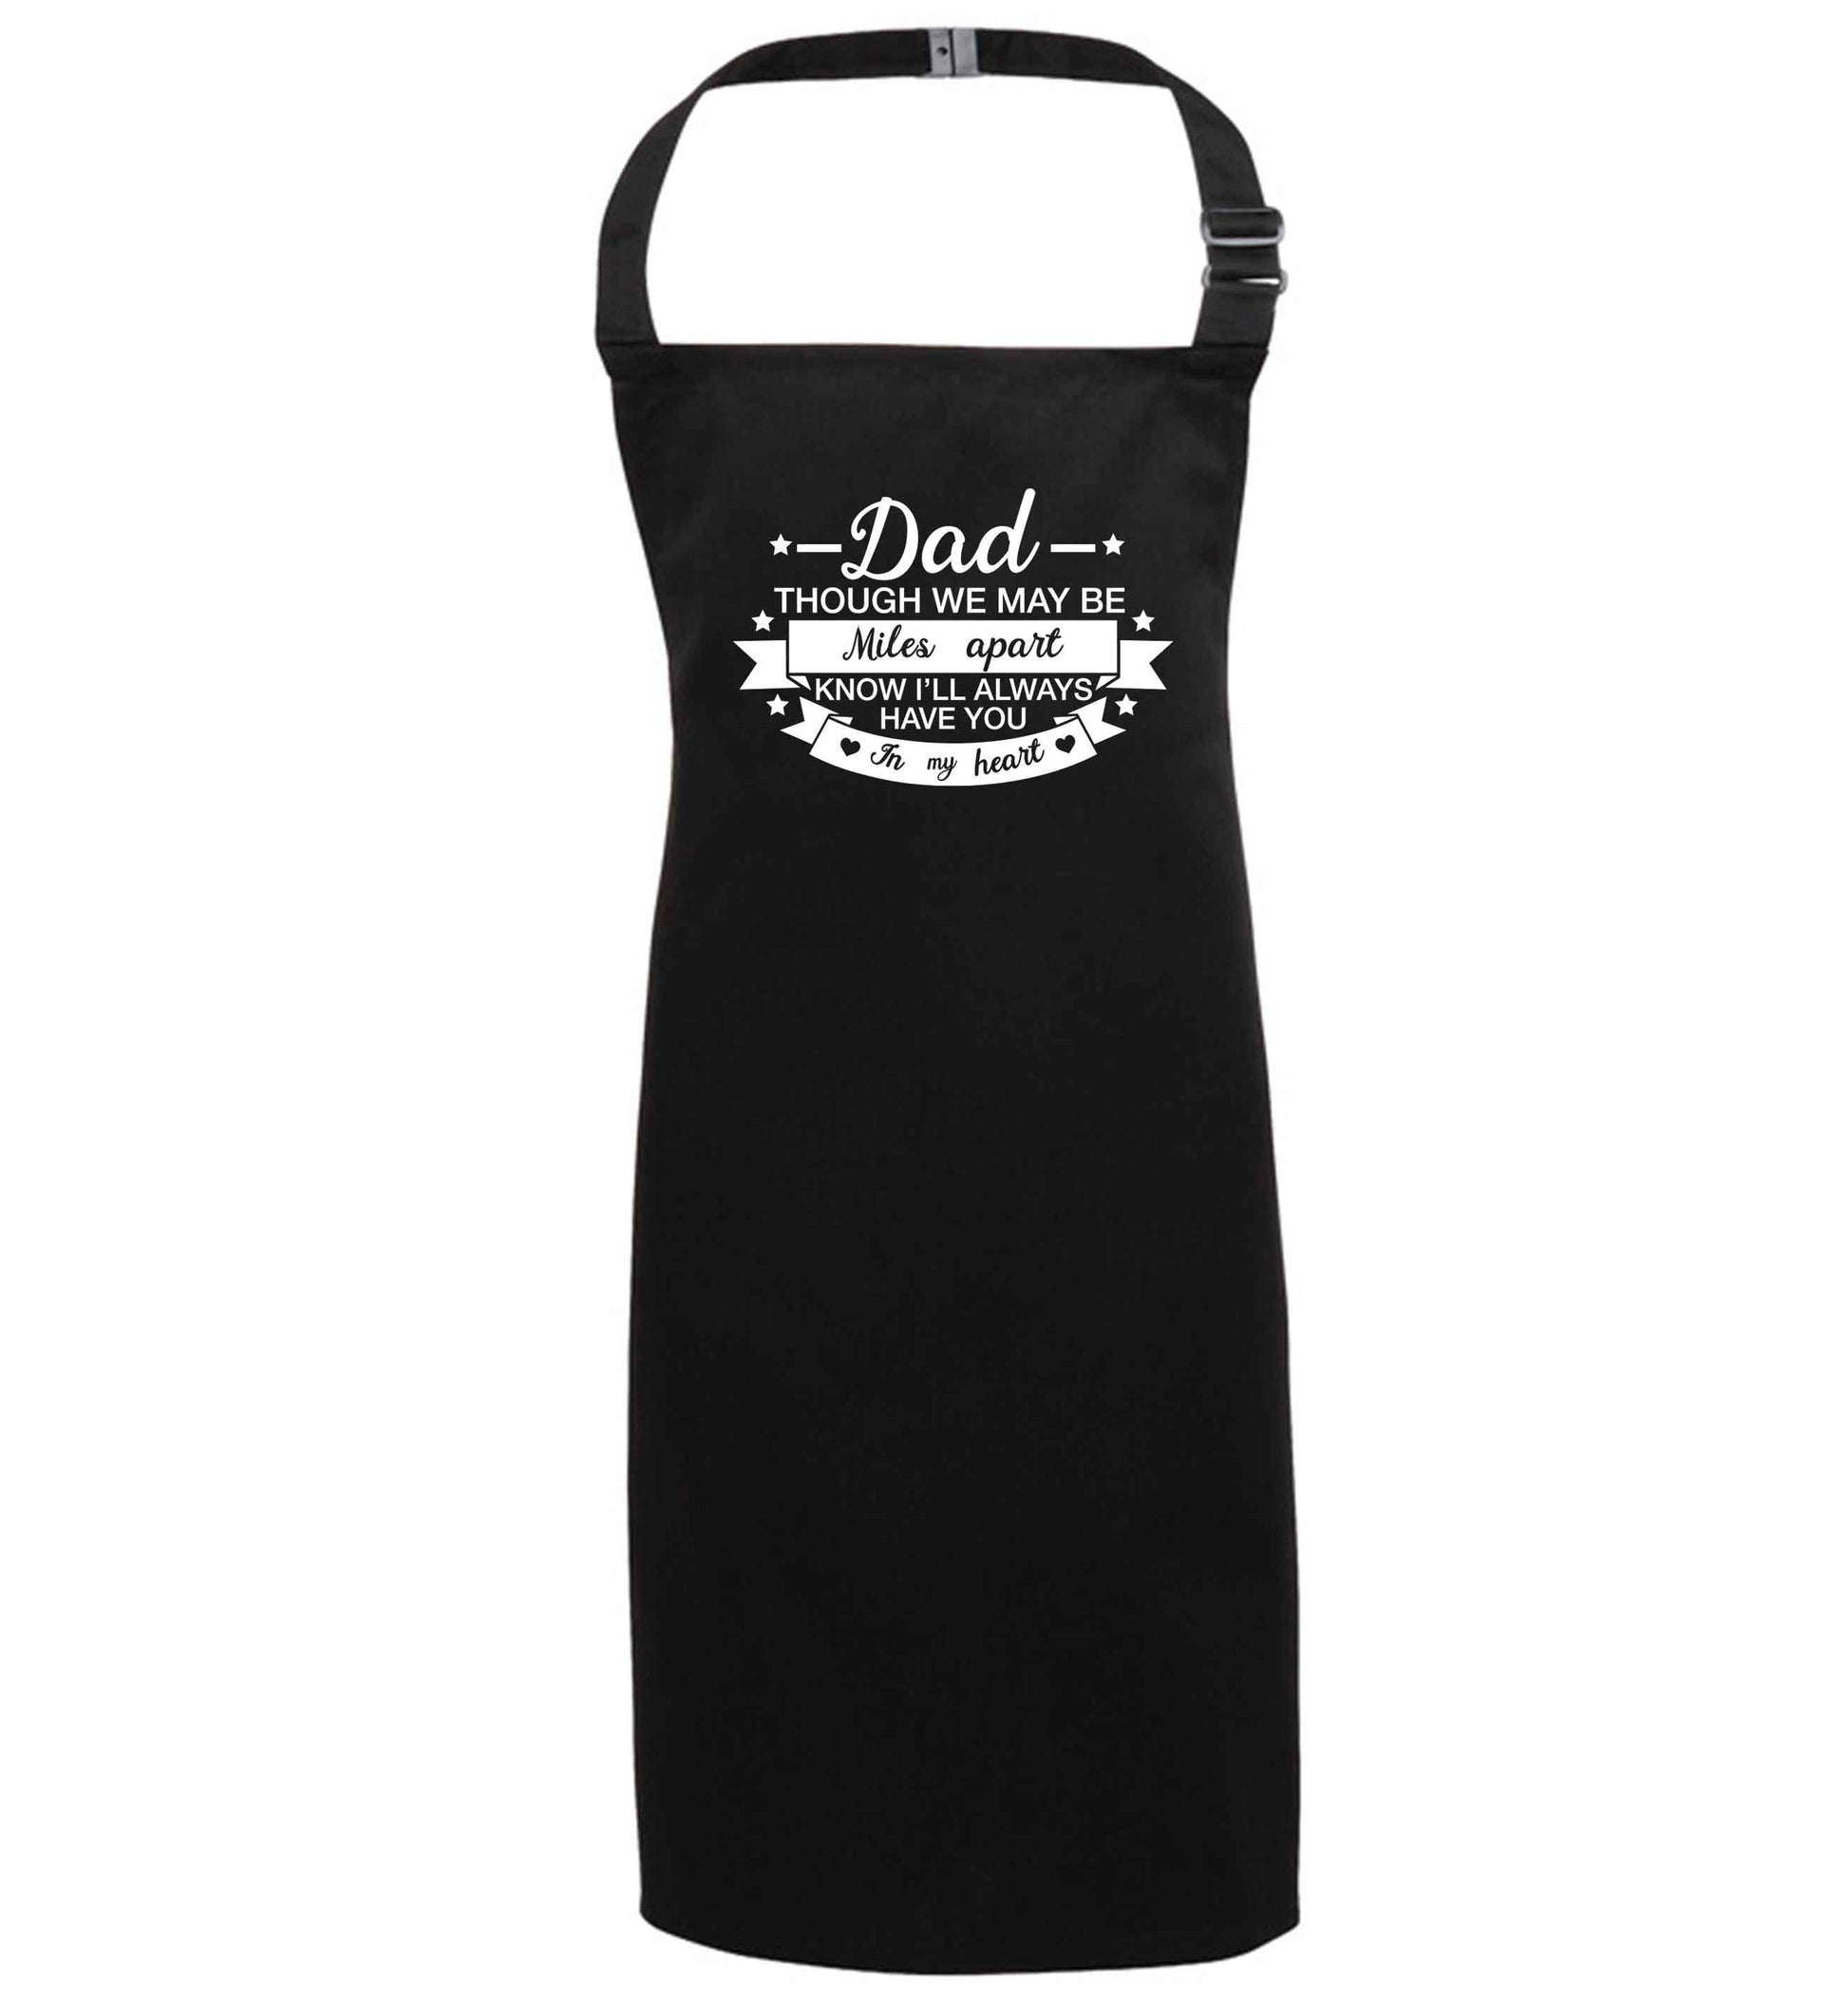 Dad though we are miles apart know I'll always have you in my heart black apron 7-10 years